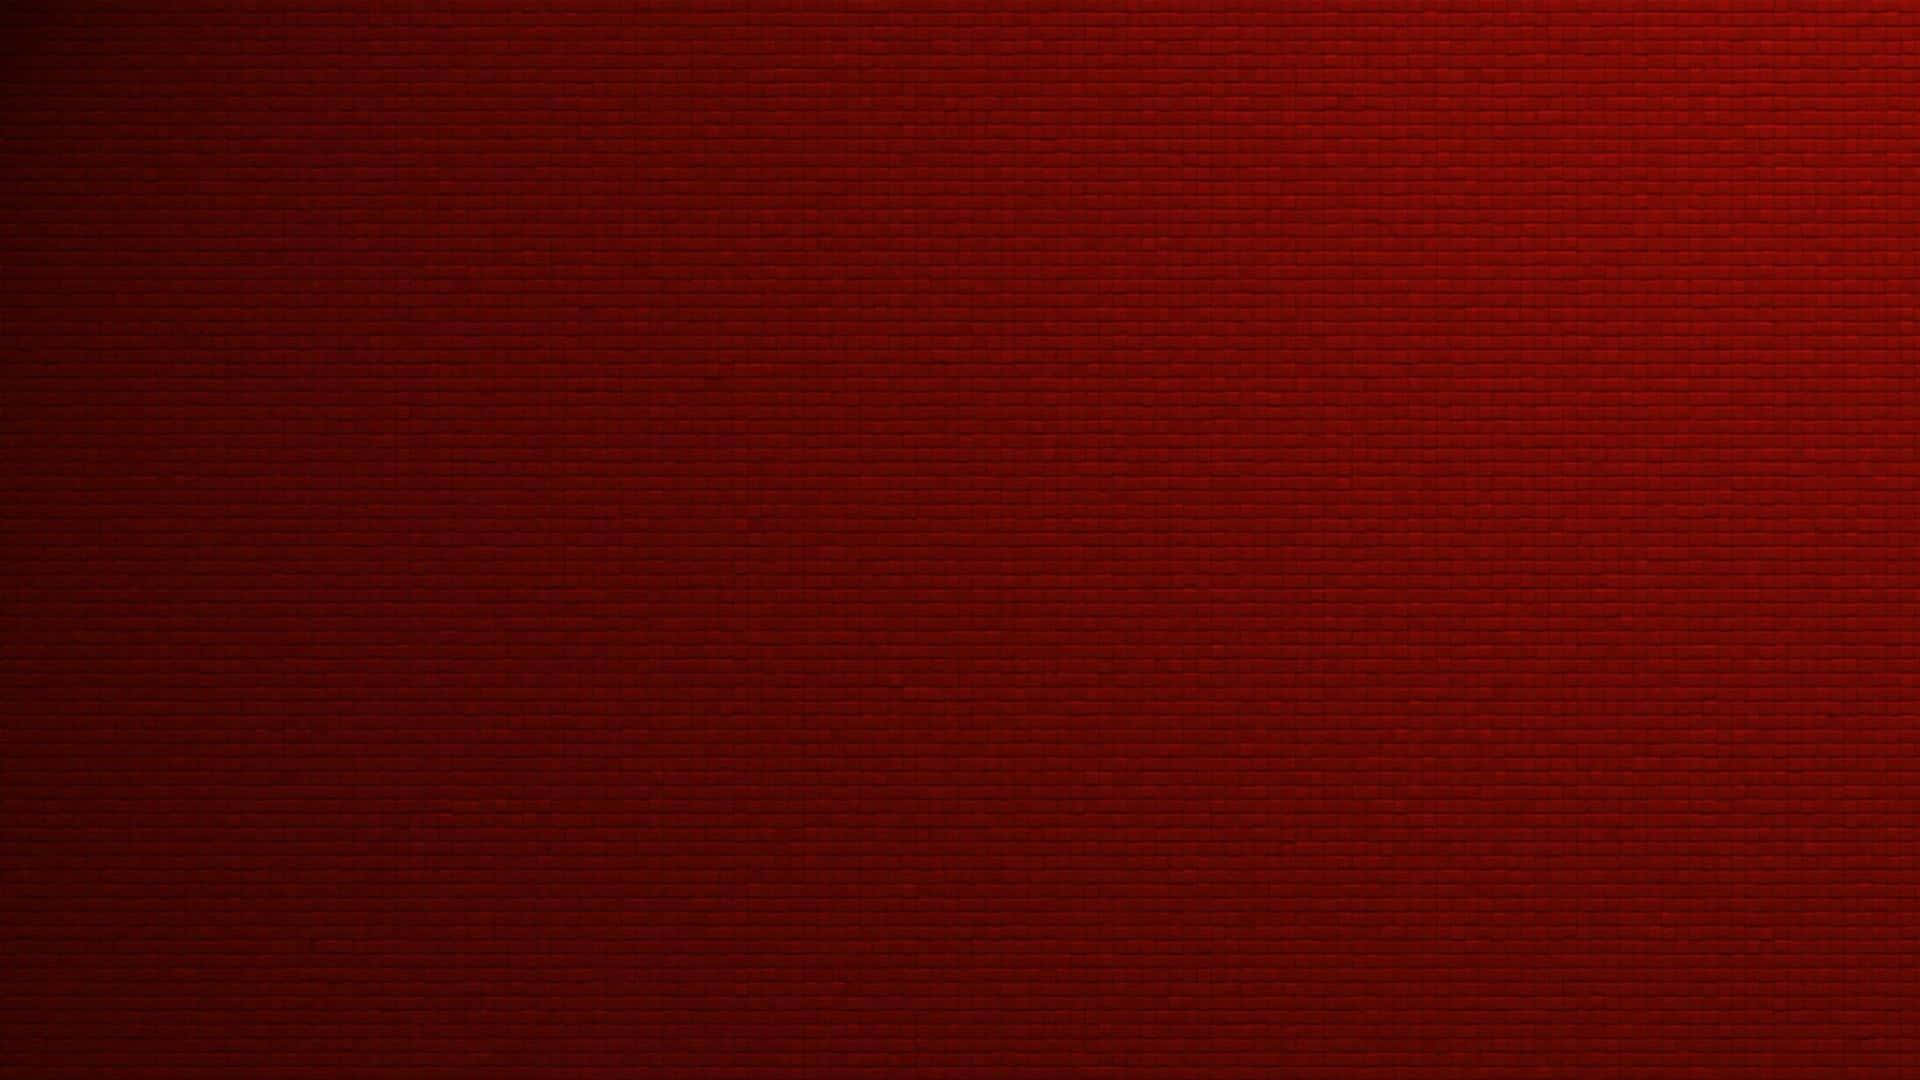 Bright red background with a subtle texture